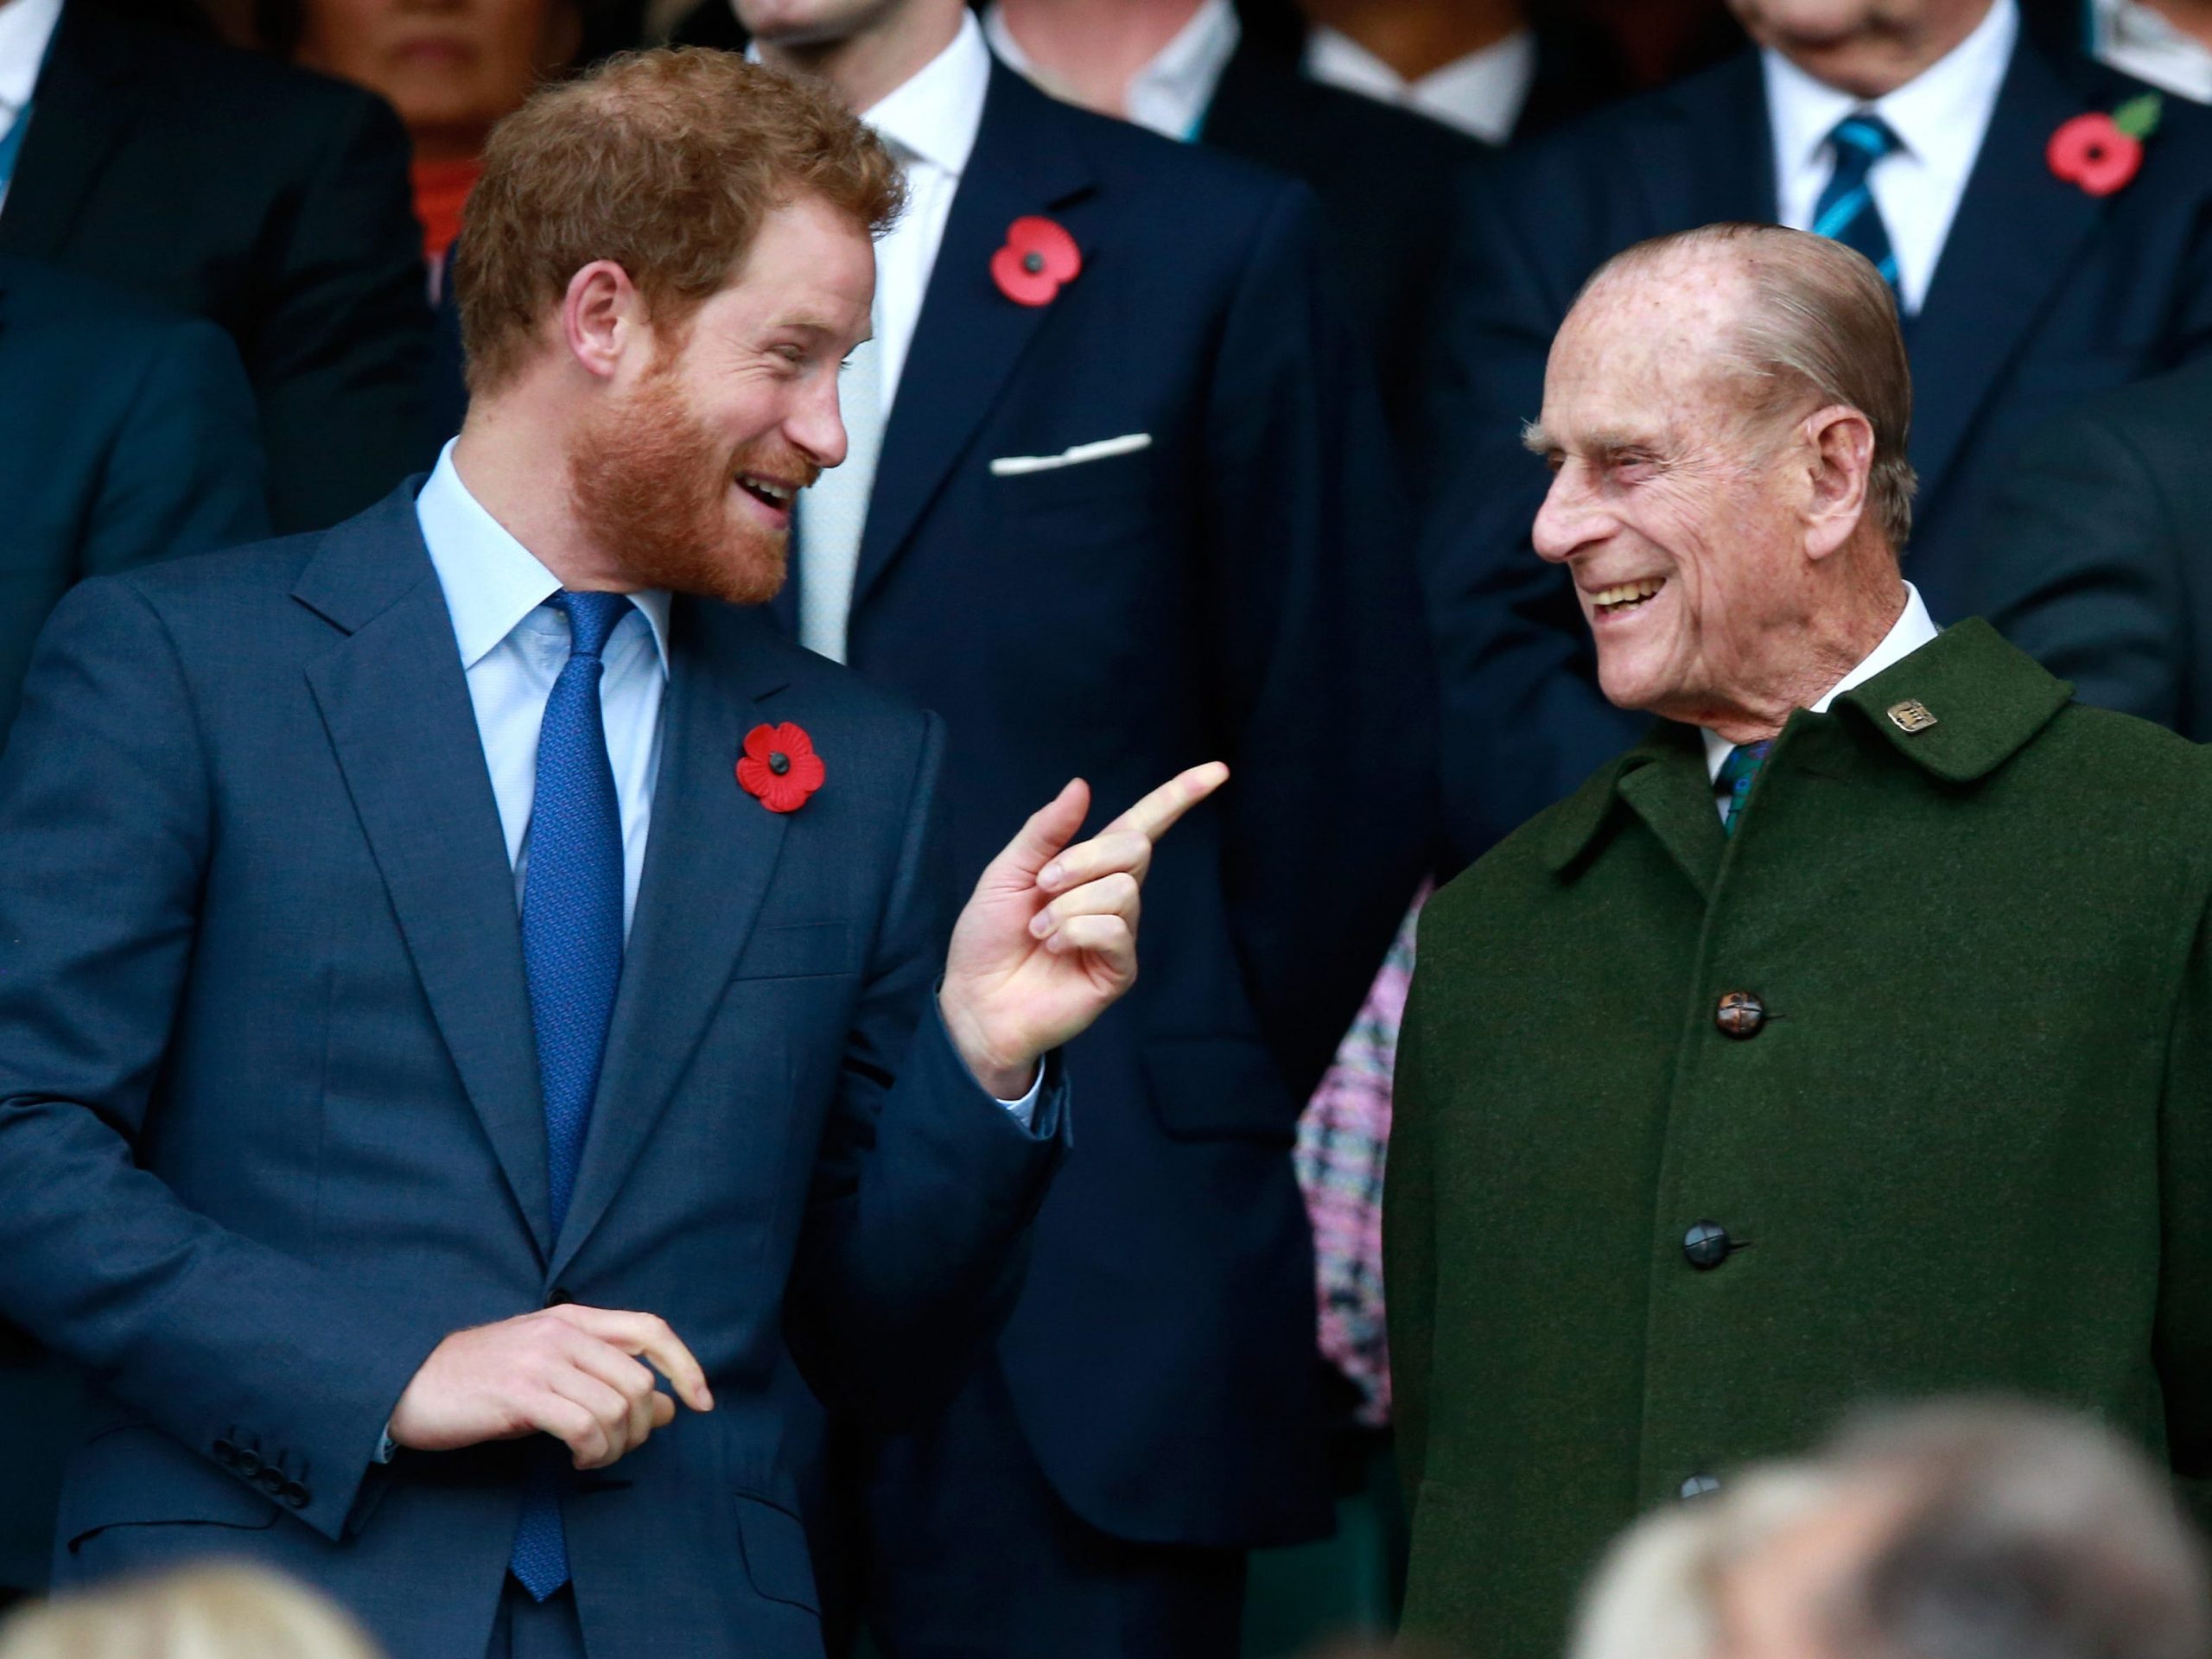 Prince Harry and Prince Phillip during the 2015 Rugby World Cup Final match.